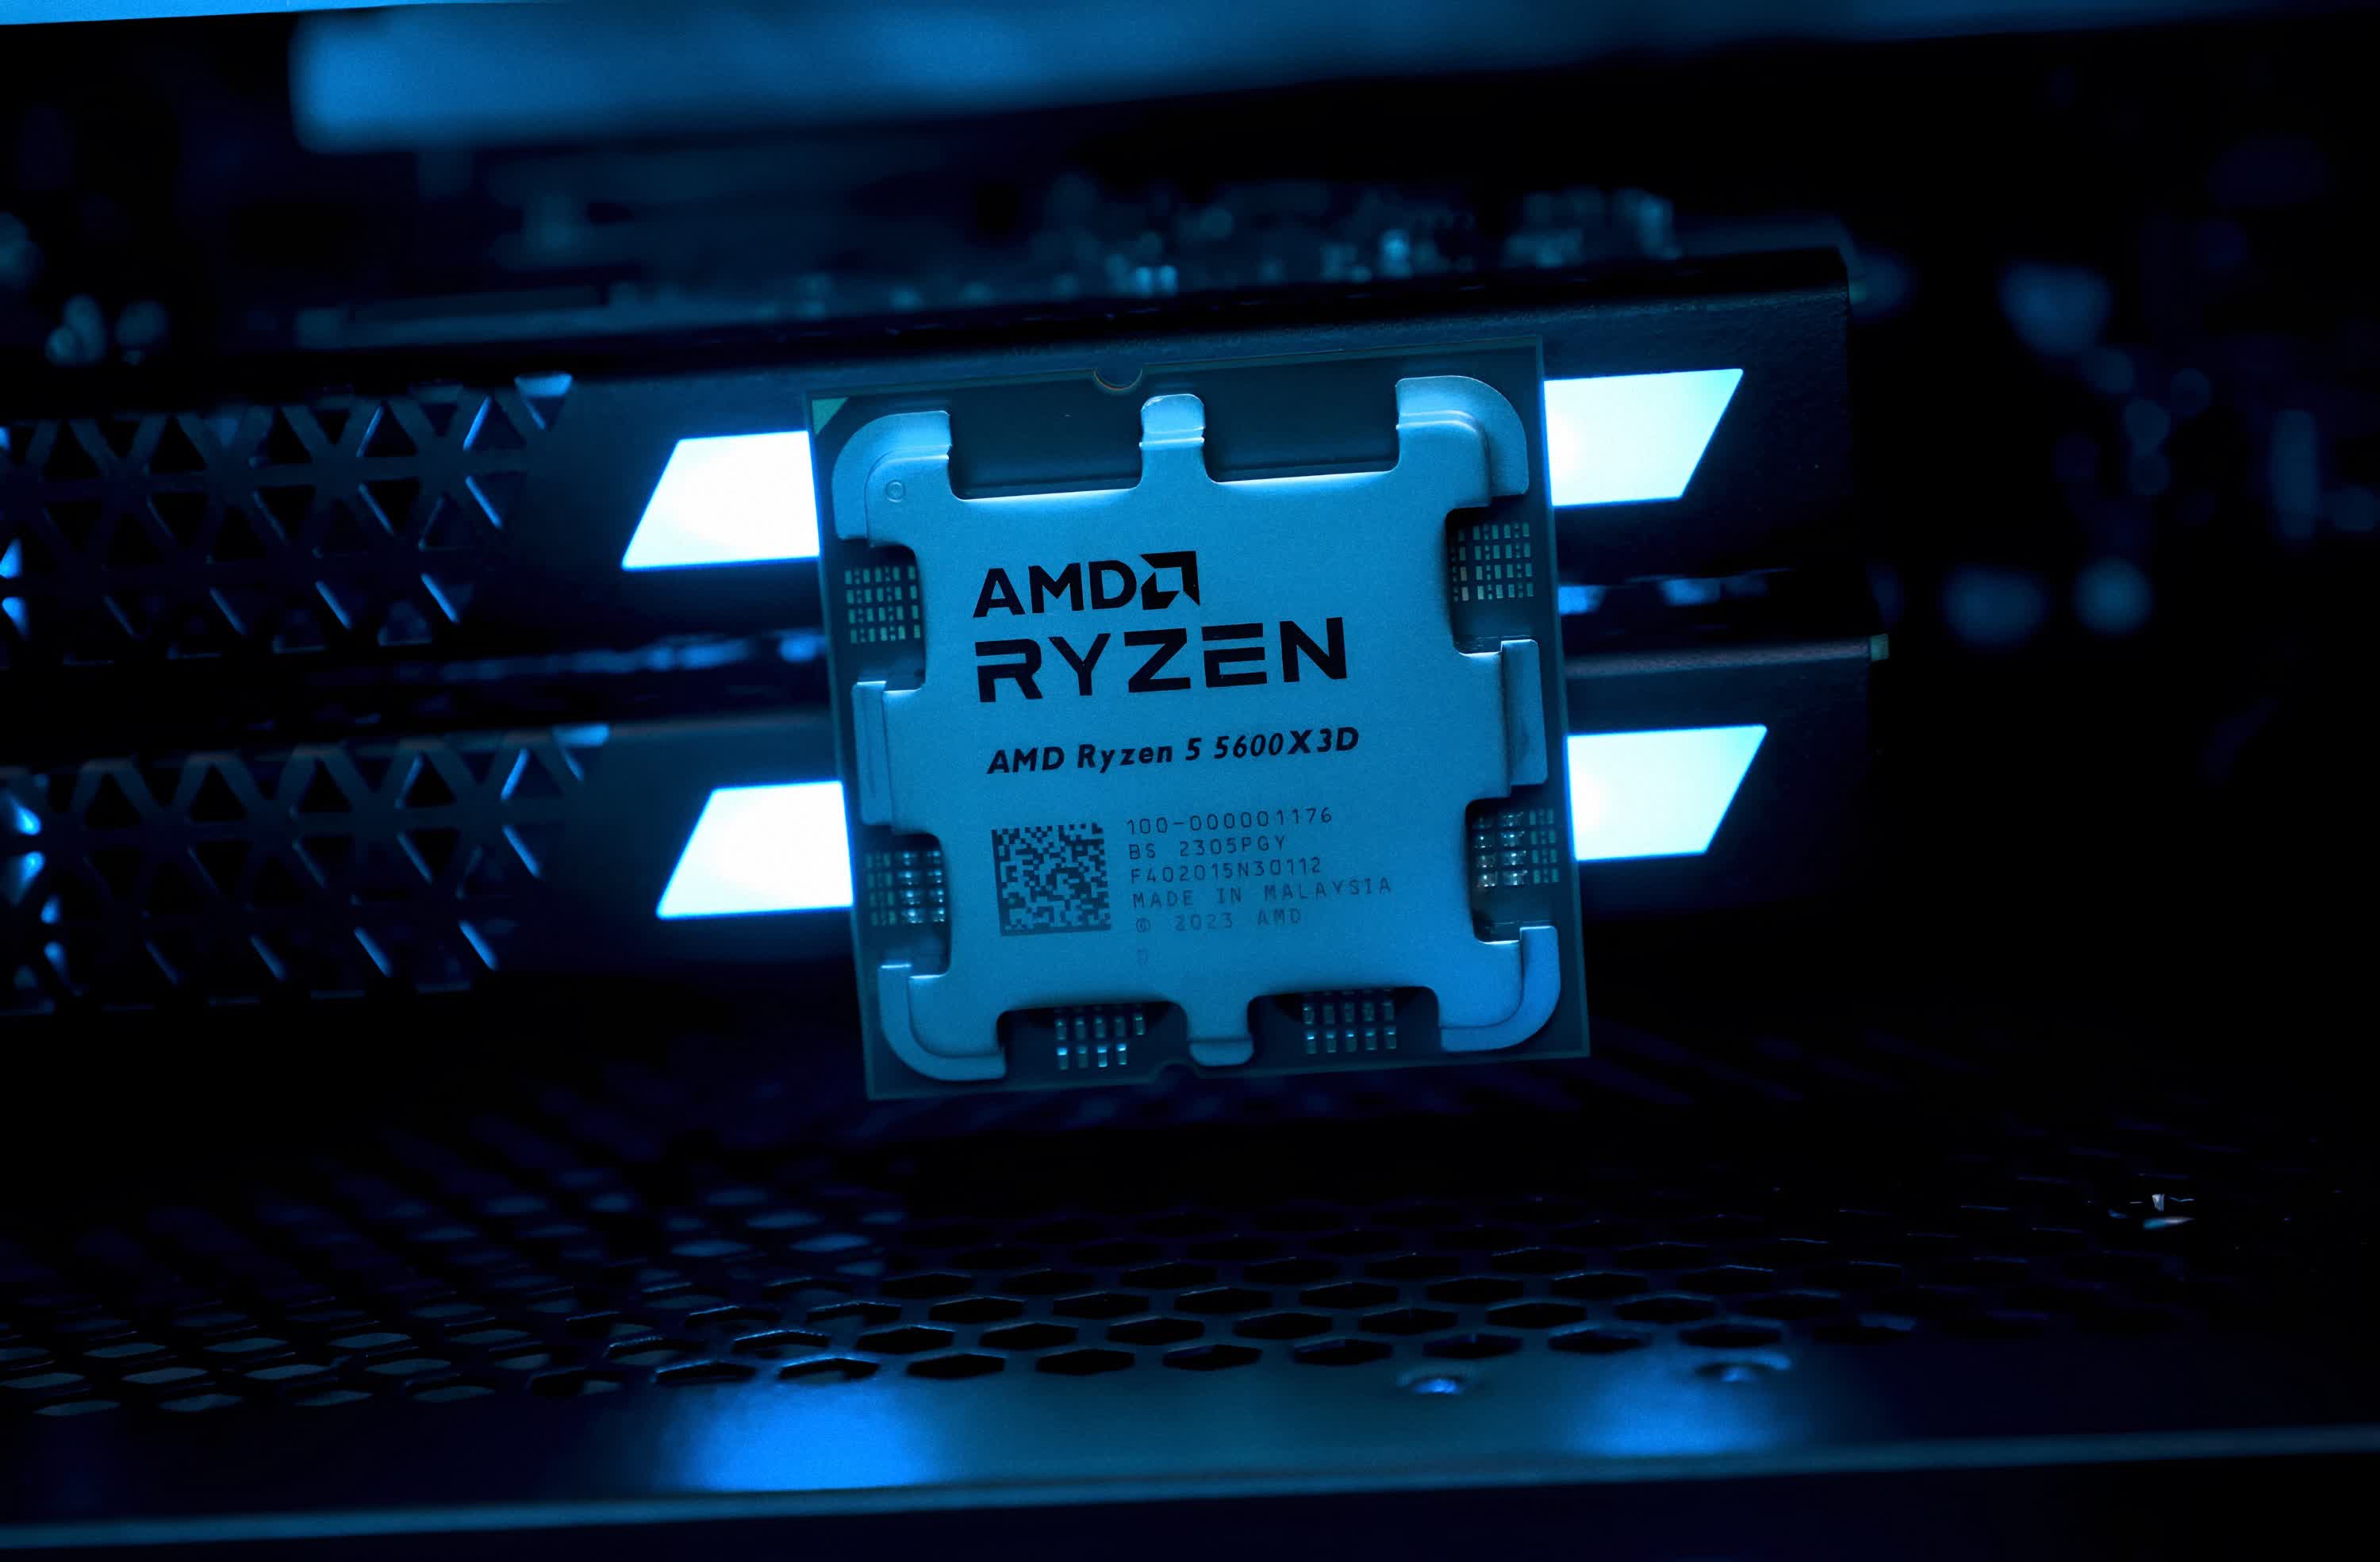 Leak suggests AMD could be prepping a Ryzen 5 5600X3D